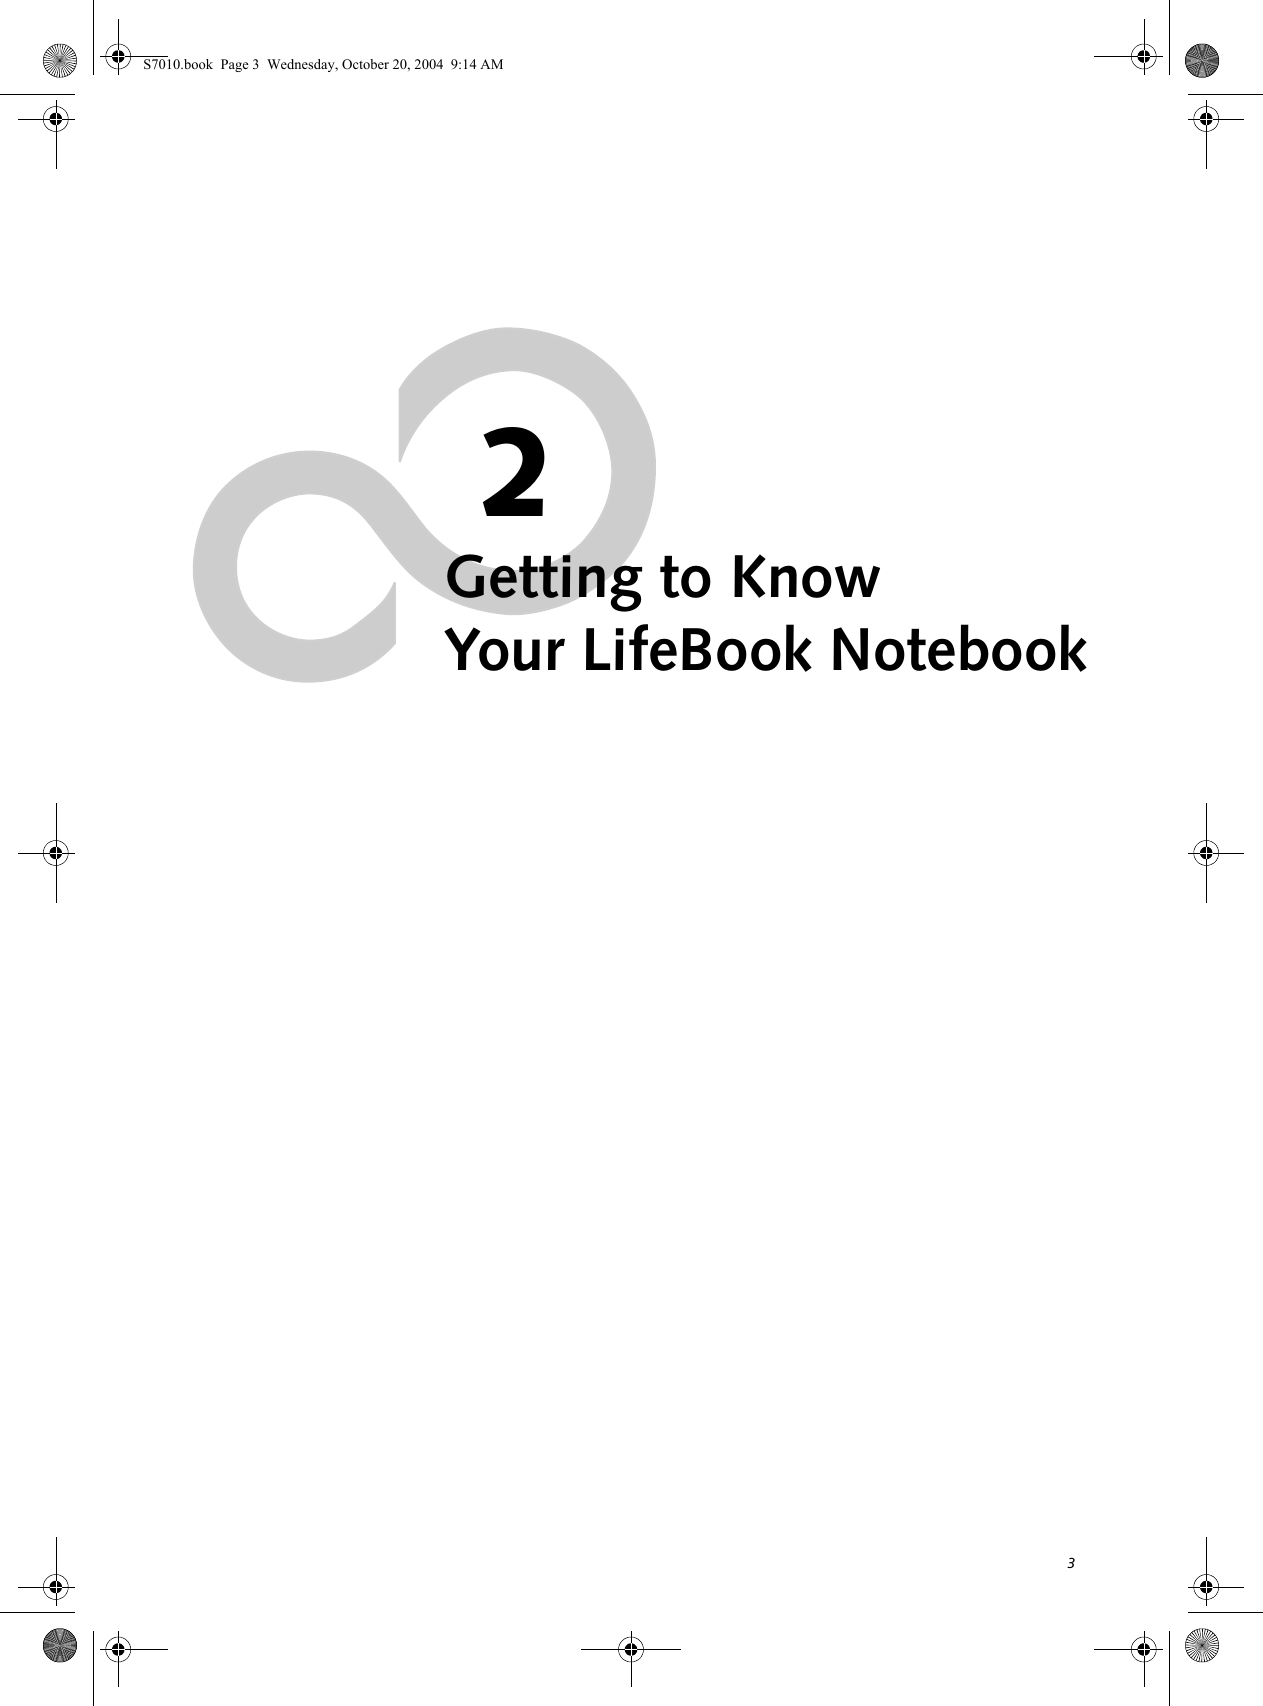 32Getting to KnowYour LifeBook NotebookS7010.book  Page 3  Wednesday, October 20, 2004  9:14 AM